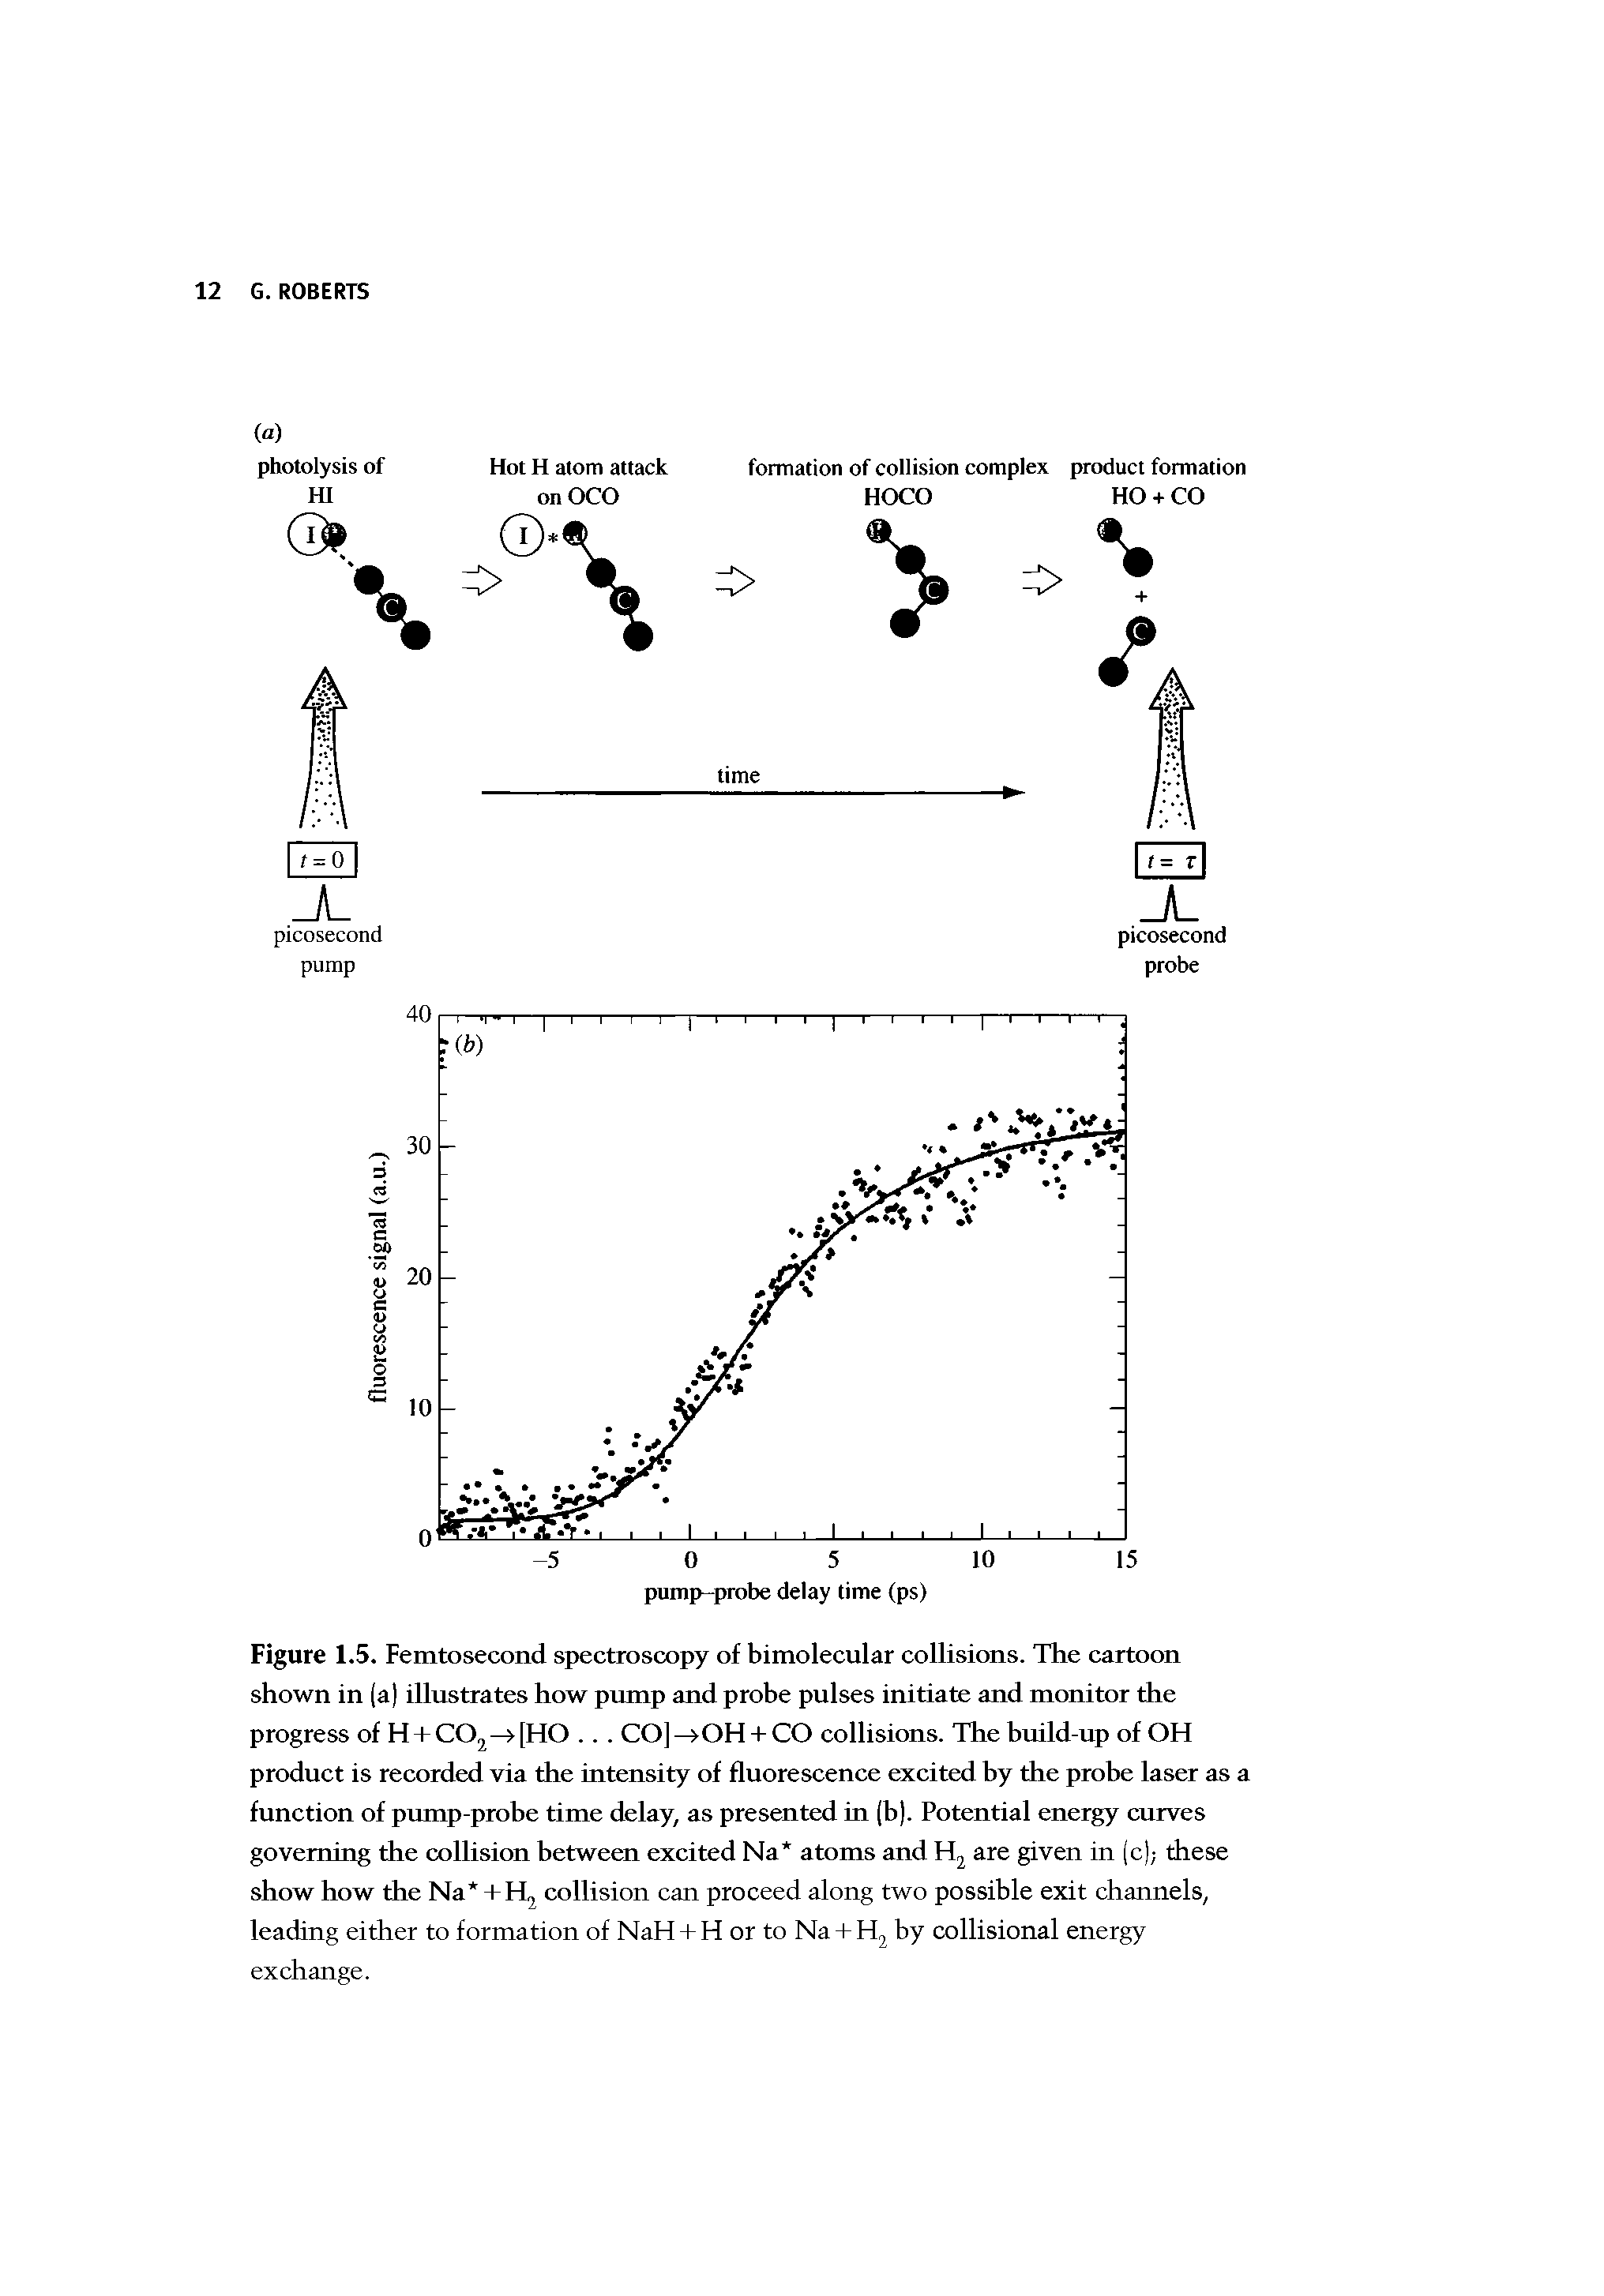 Figure 1.5. Femtosecond spectroscopy of bimolecular collisions. The cartoon shown in (a illustrates how pump and probe pulses initiate and monitor the progress of H + COj->[HO. .. CO]->OH + CO collisions. The huild-up of OH product is recorded via the intensity of fluorescence excited hy the prohe laser as a function of pump-prohe time delay, as presented in (h). Potential energy curves governing the collision between excited Na atoms and Hj are given in (c) these show how the Na + H collision can proceed along two possible exit channels, leading either to formation of NaH + H or to Na + H by collisional energy exchange.